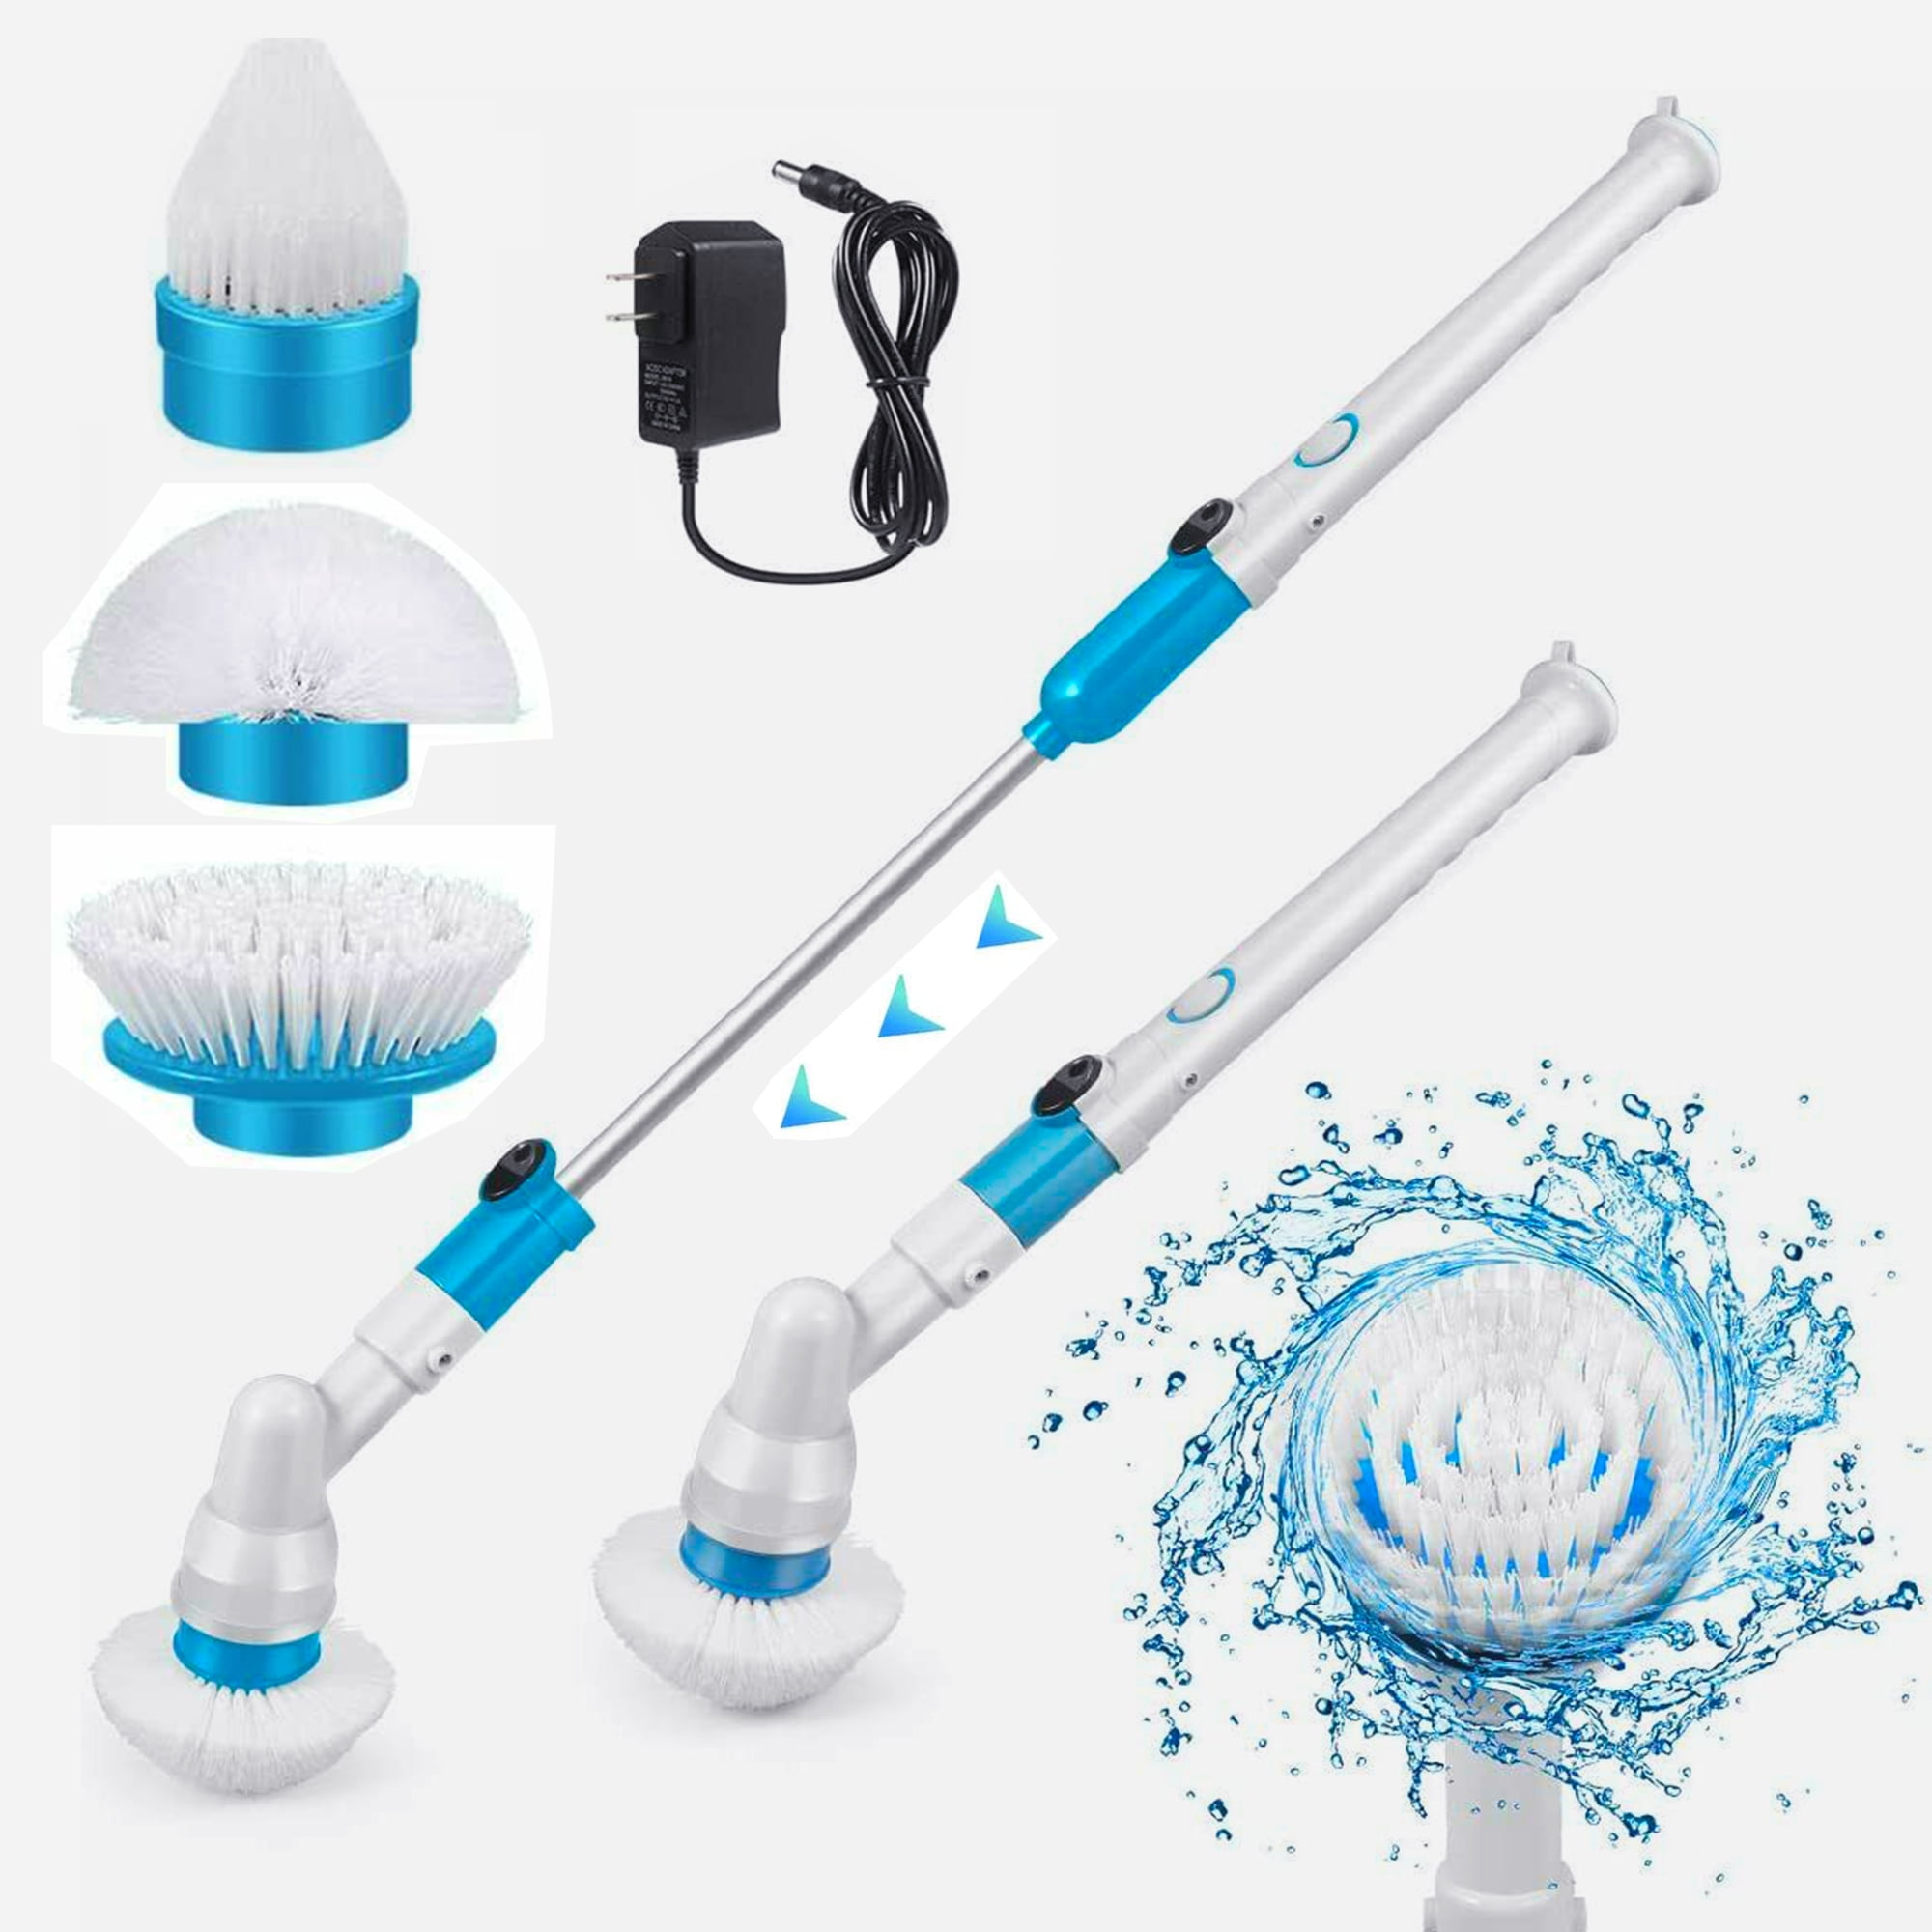 SICENXTOOLS Grout Cleaner for Tile Floors Electric Grout Cleaner Machine  Tile cleaner with A Power Roller Brush Work for Whole House and Big Garden